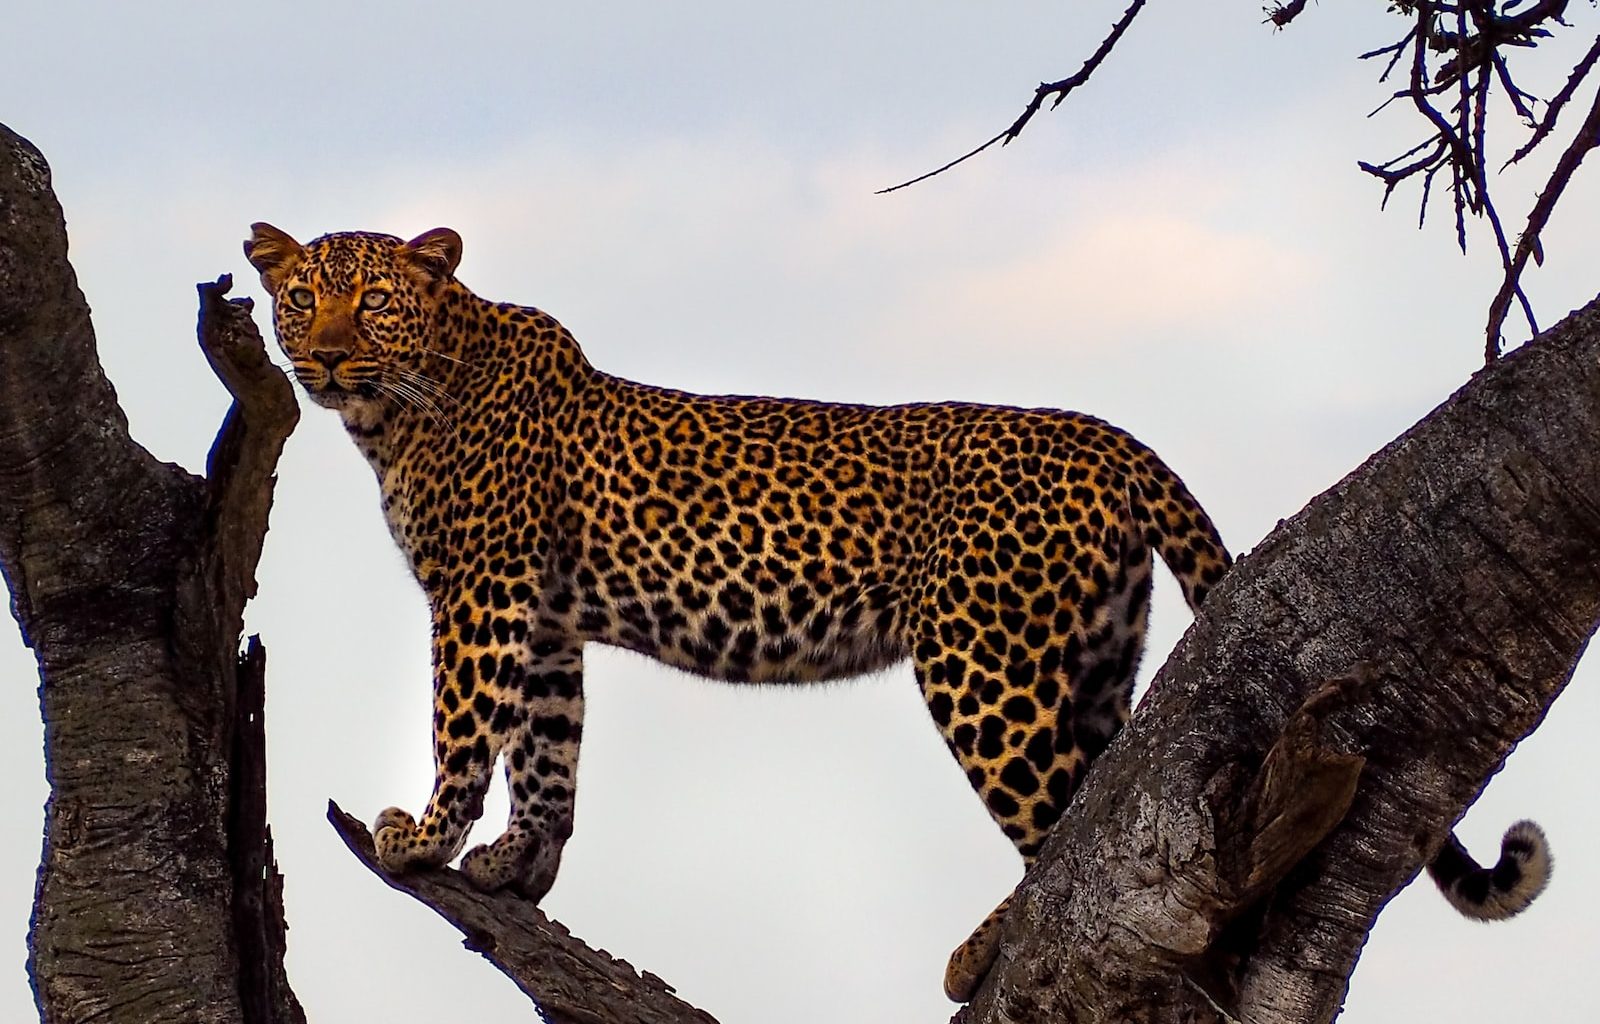 leopard on top of tree during daytime